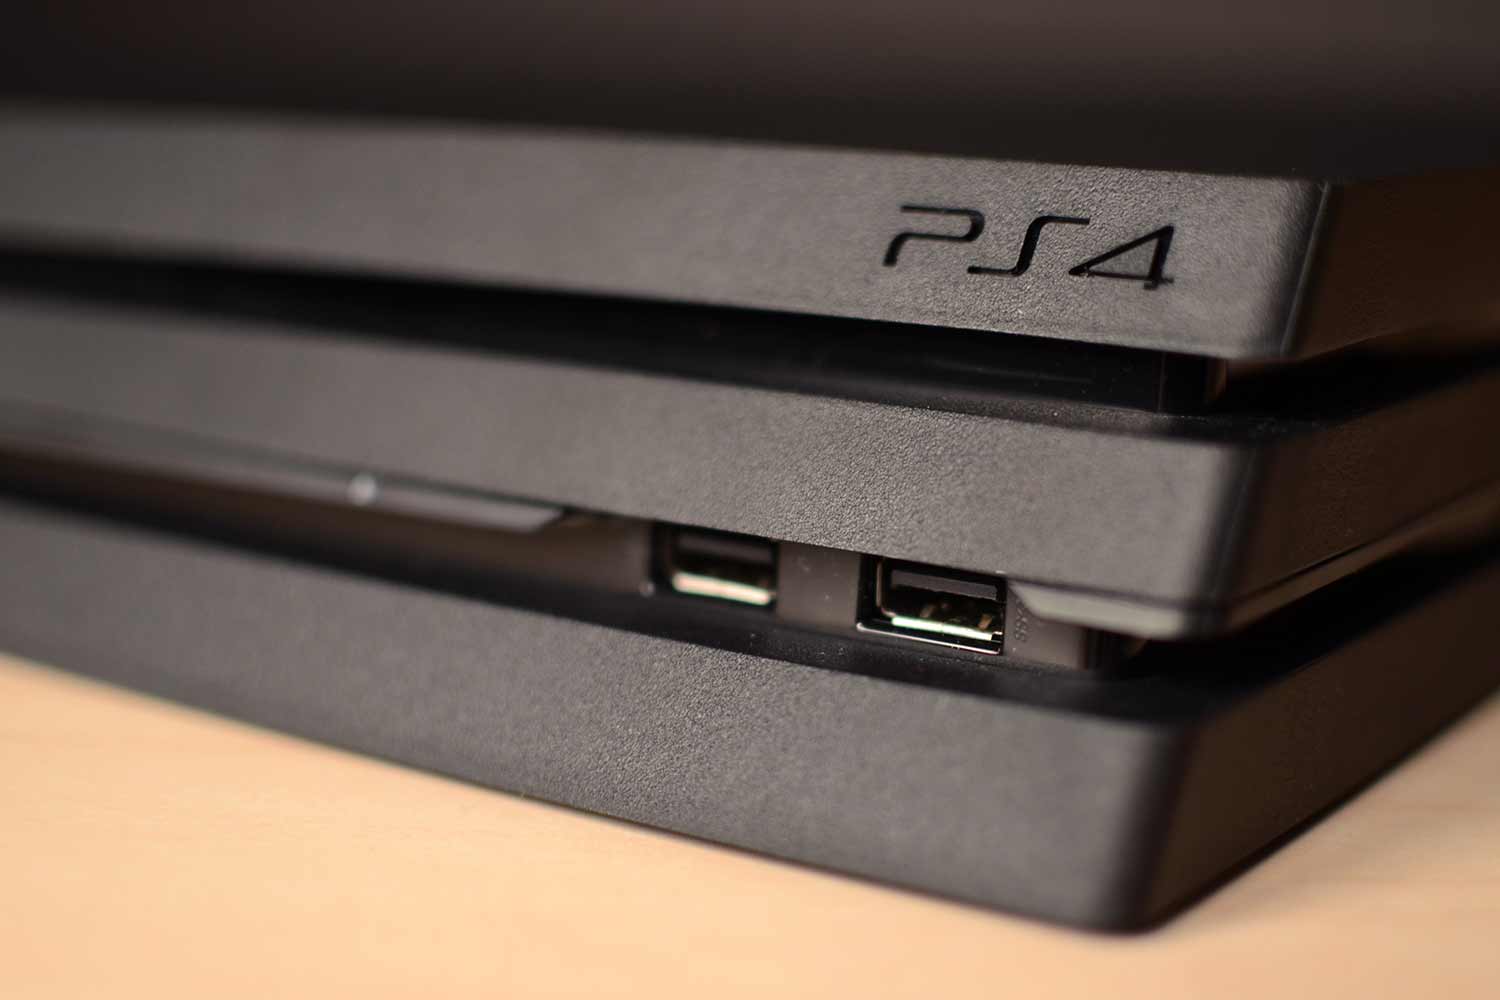 PS4 Pro Was a Test Case for PlayStation 5's Lifecycle, According